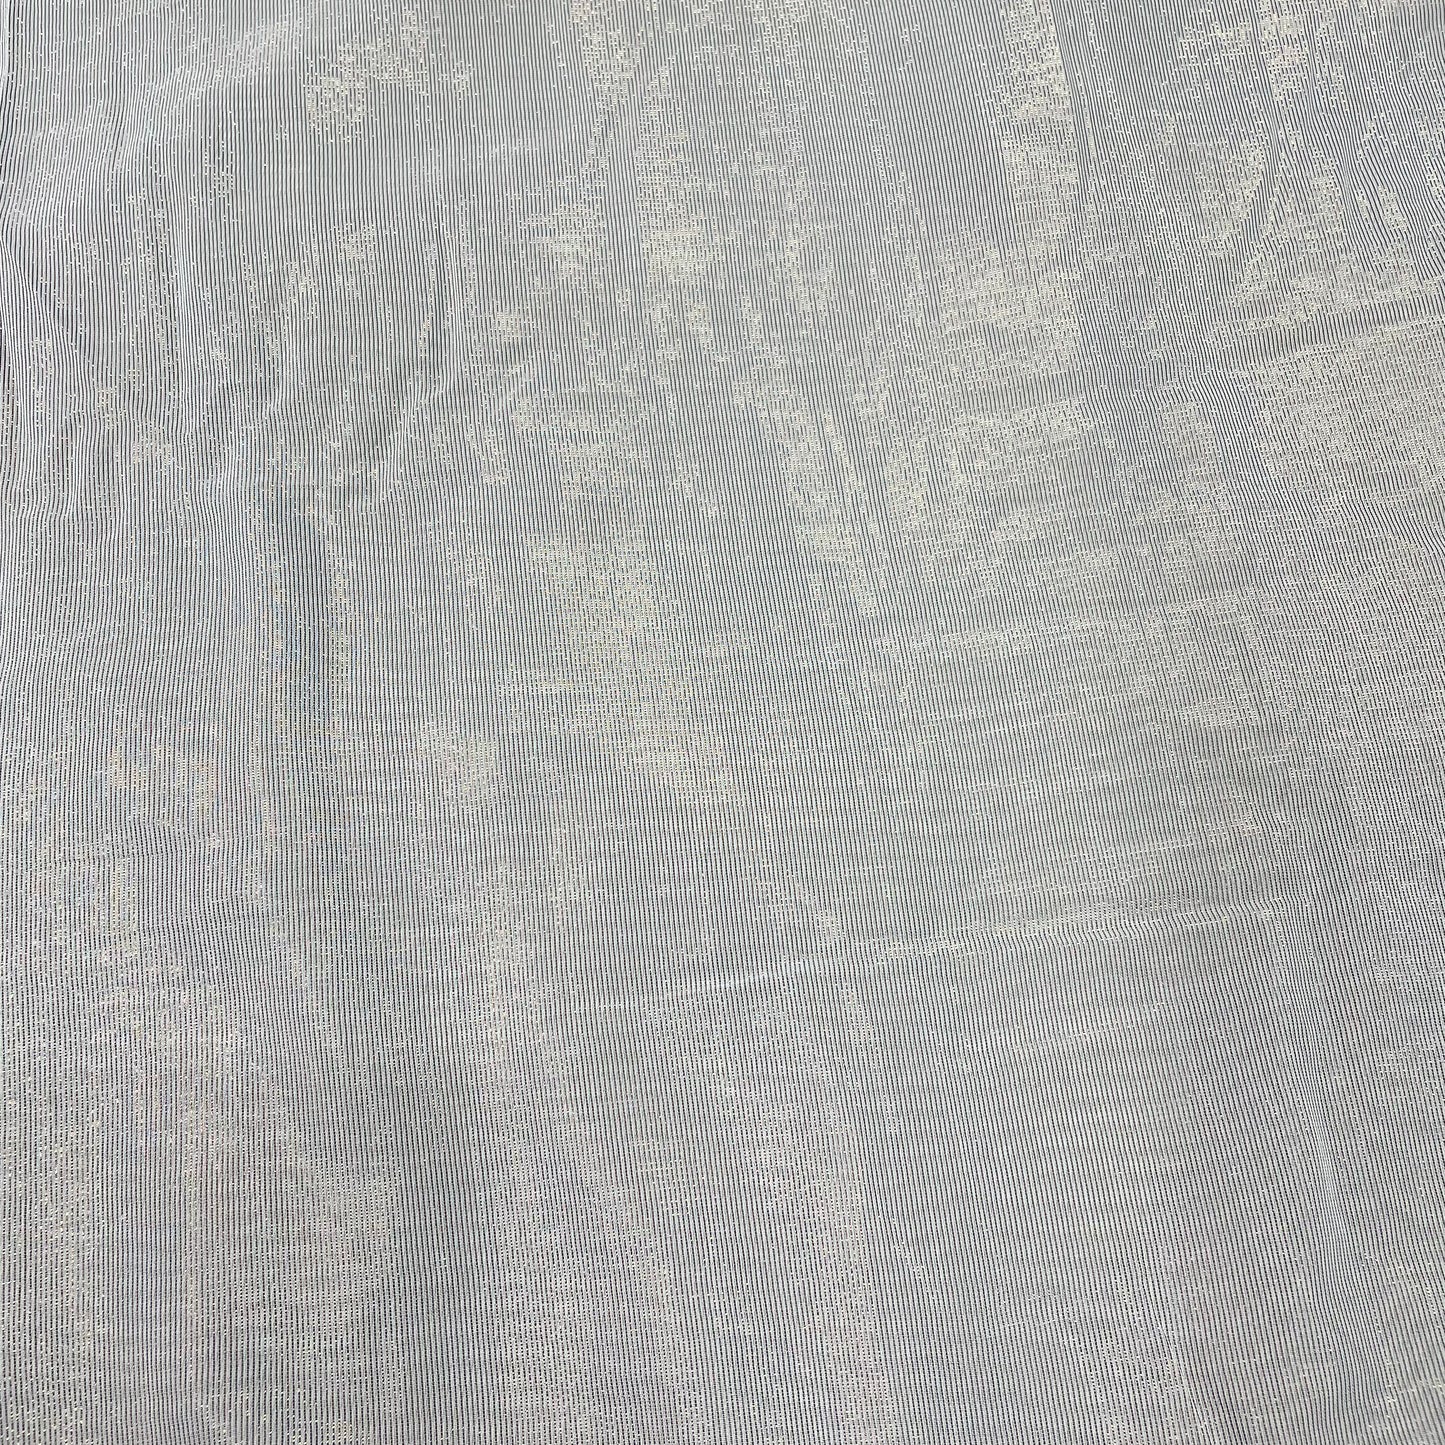 Grey With Golden Lurex Georgette Jacquard Fabric